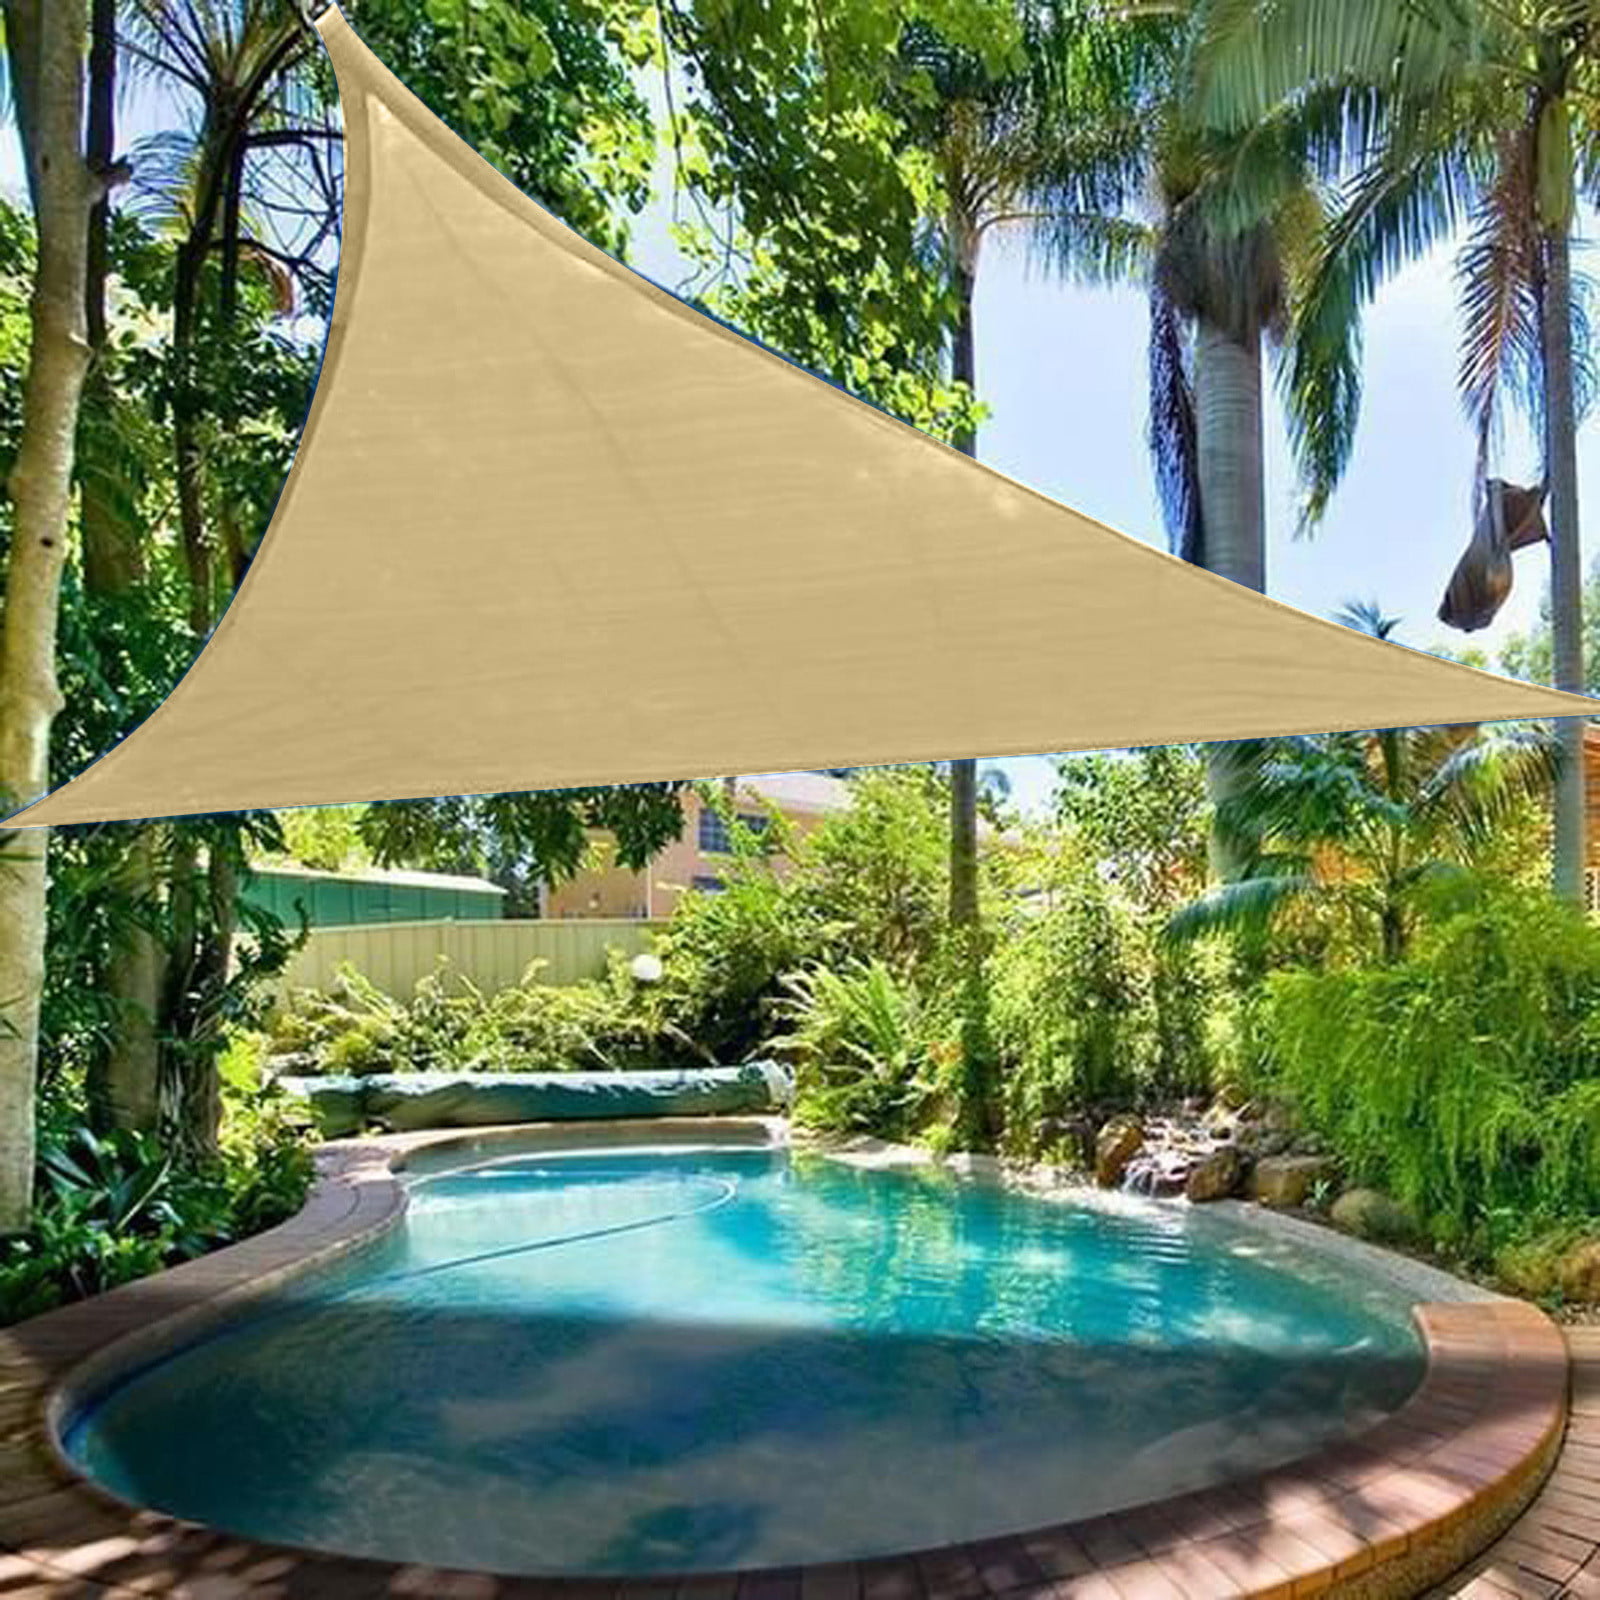 Sun Shade Sail UV Block Waterproof Canopy Patio Pool Awning Top Cover Outdoor BT 